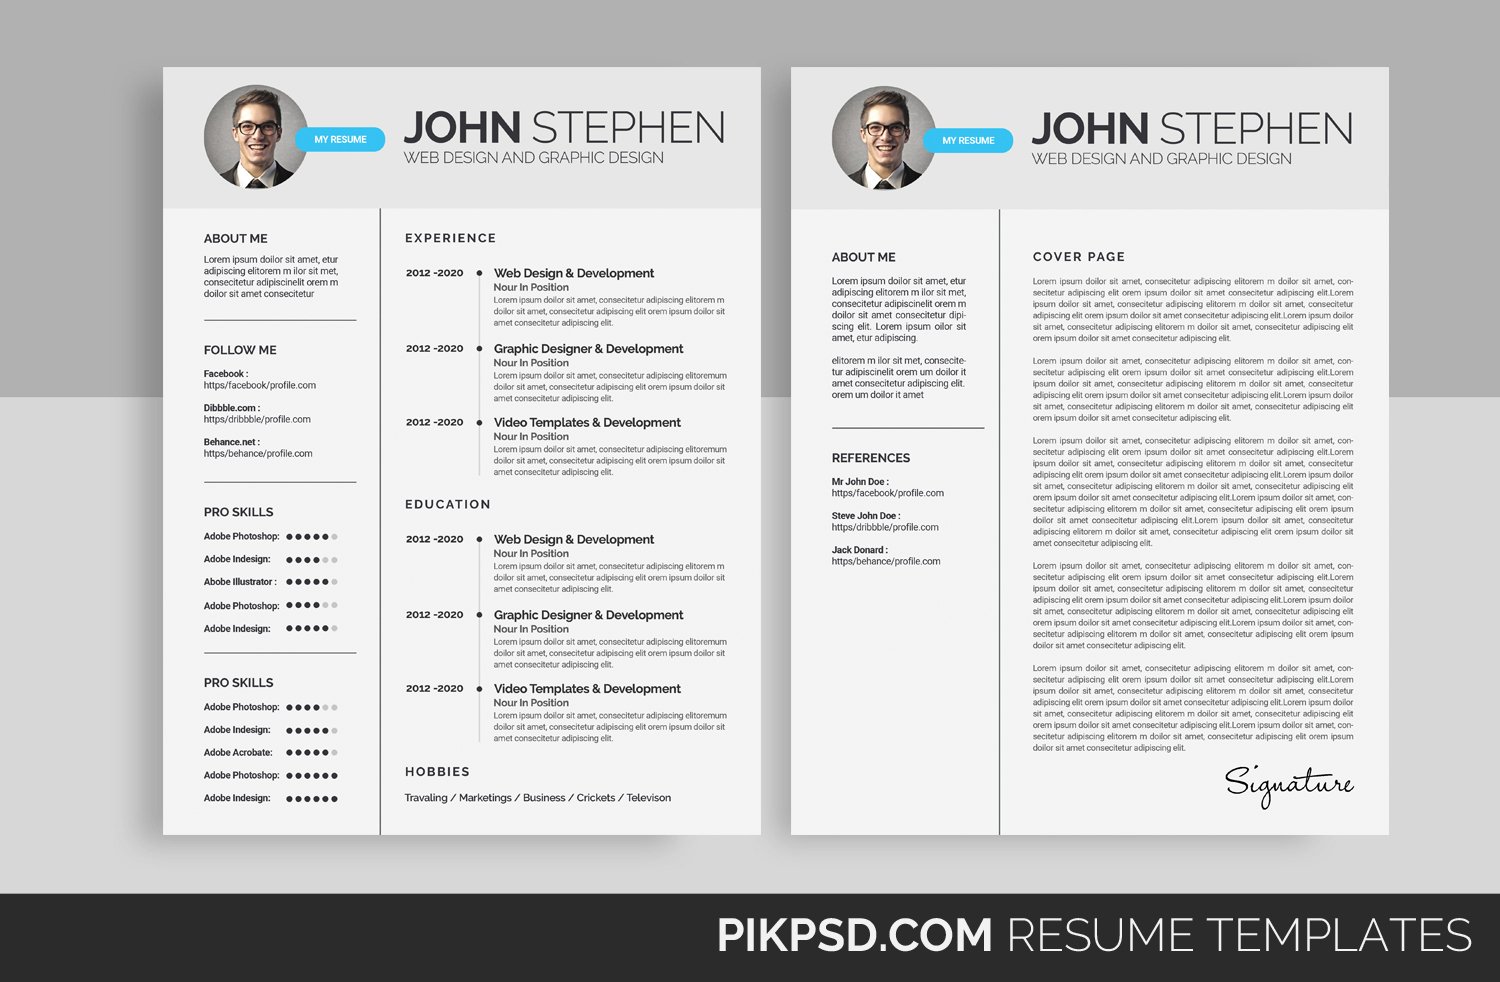 Resume/CV (2 Page) cover image.